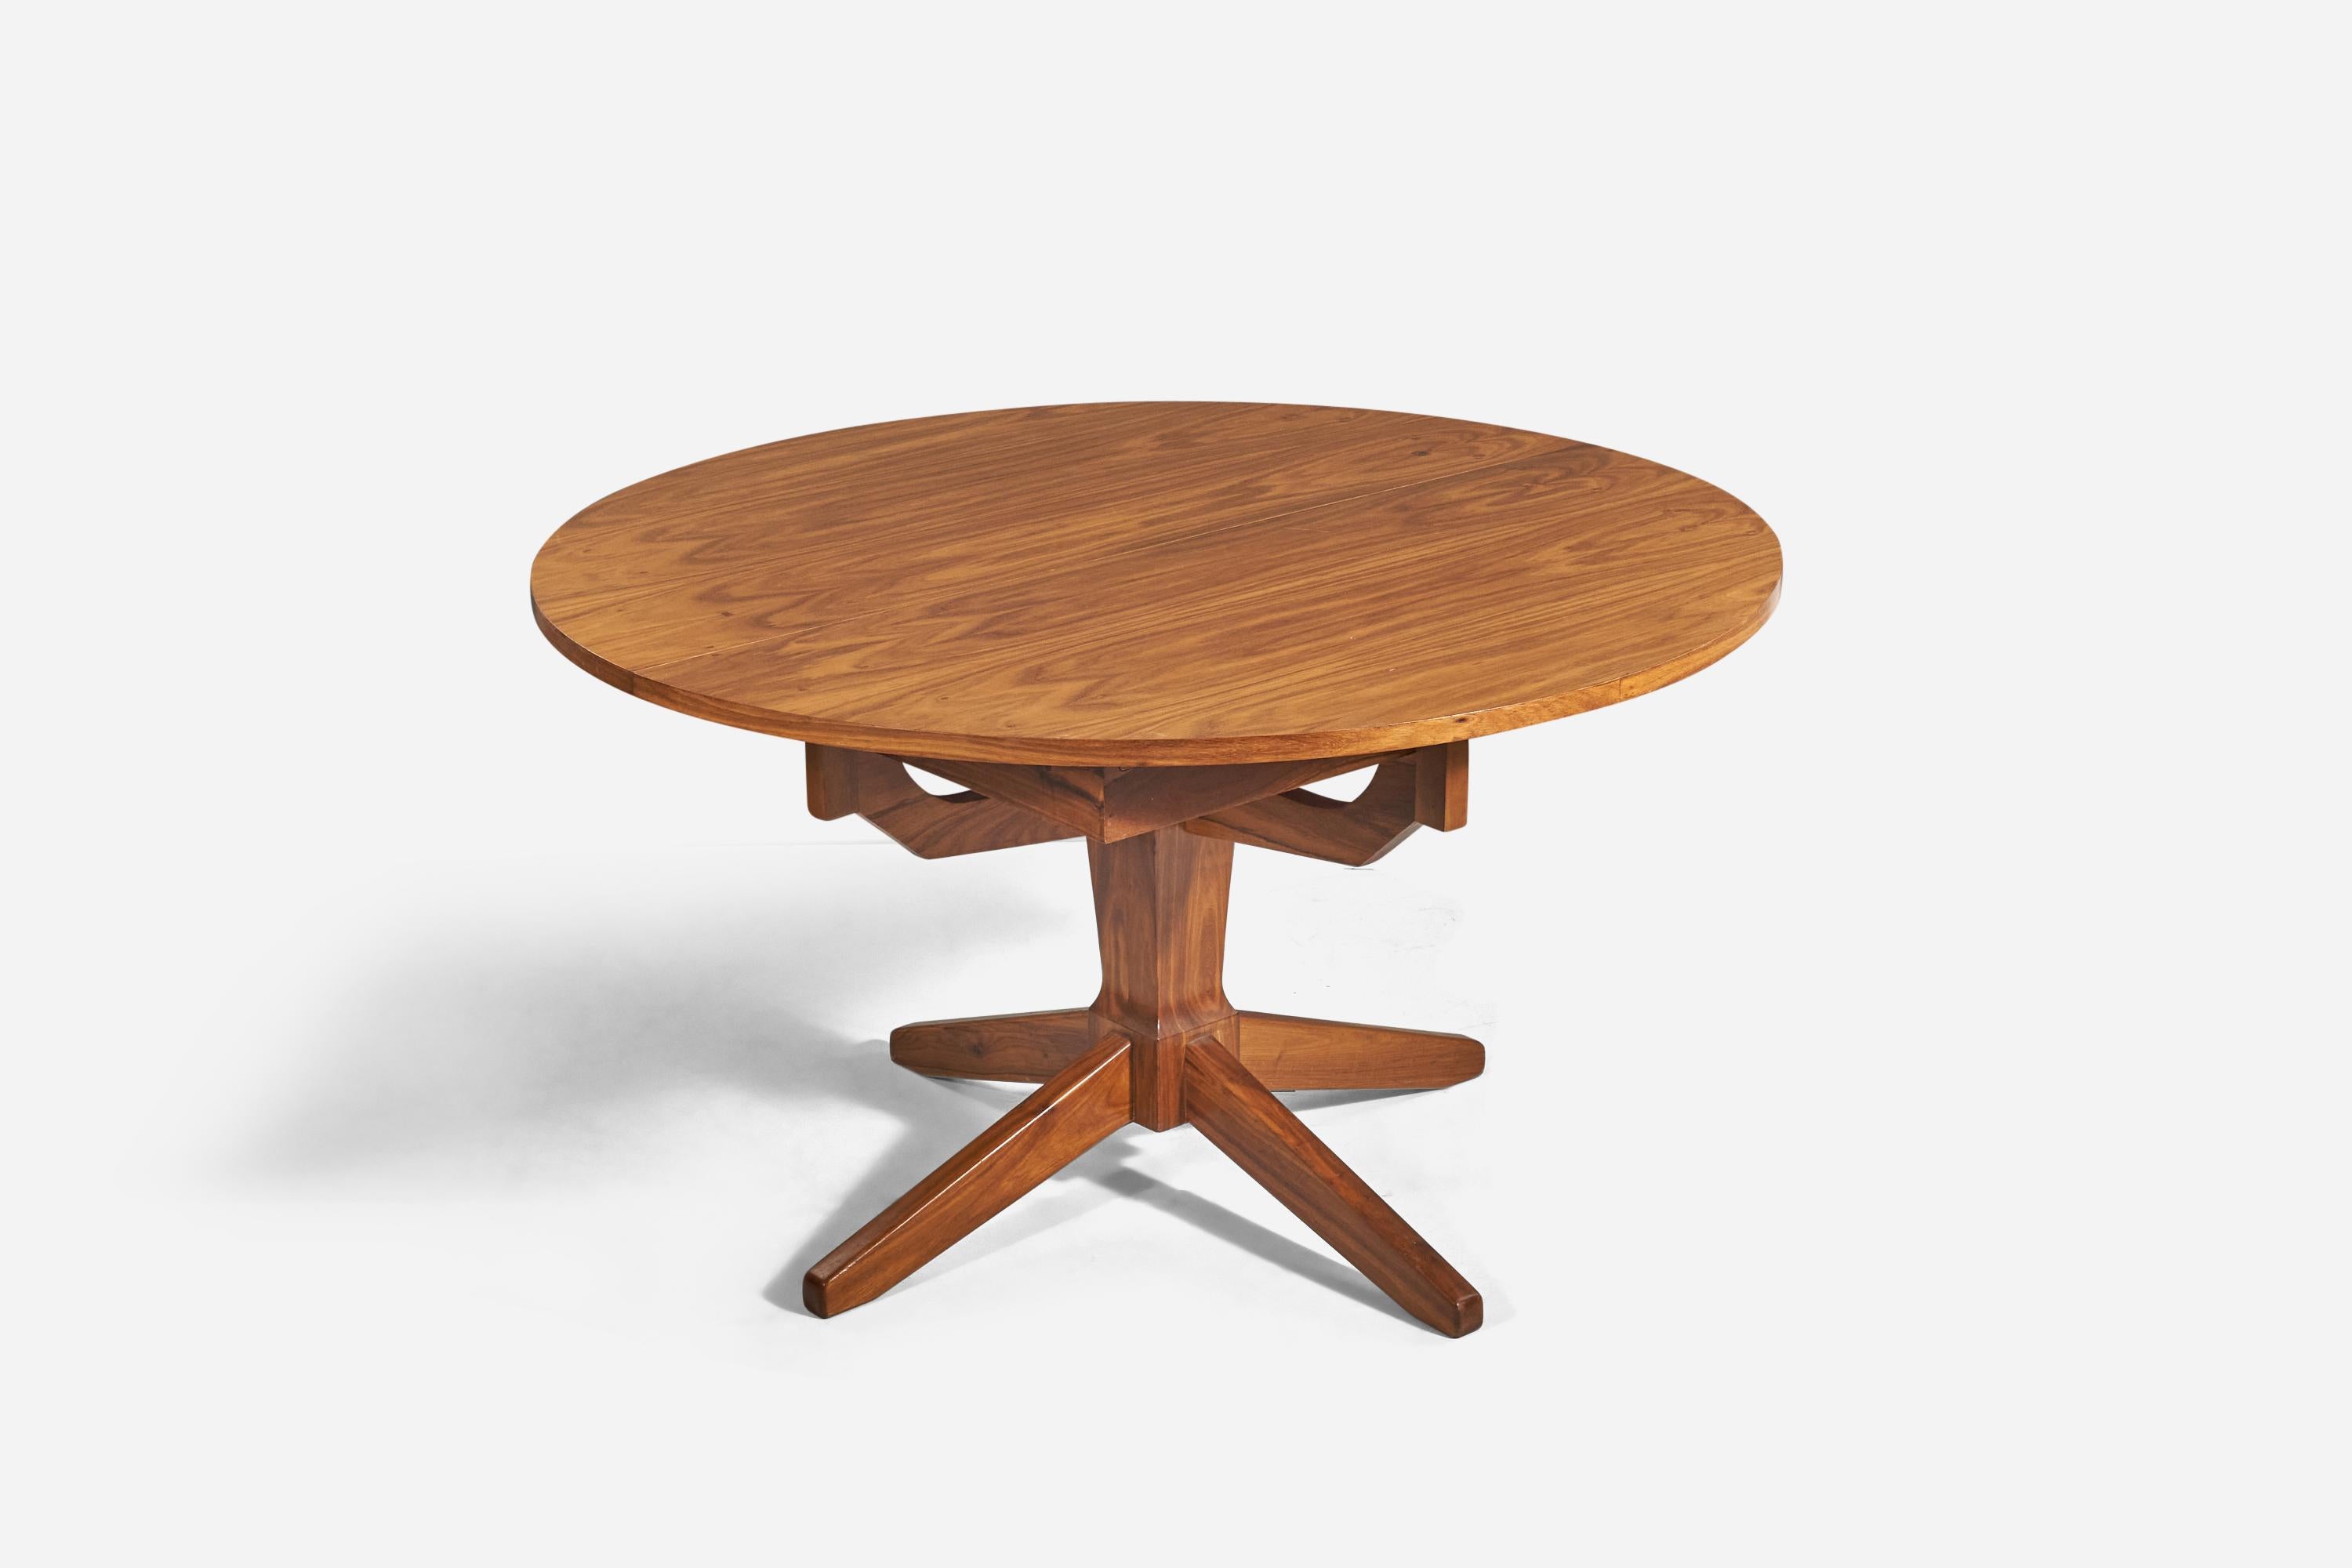 A wooden table designed and produced in South Africa, 1950s.